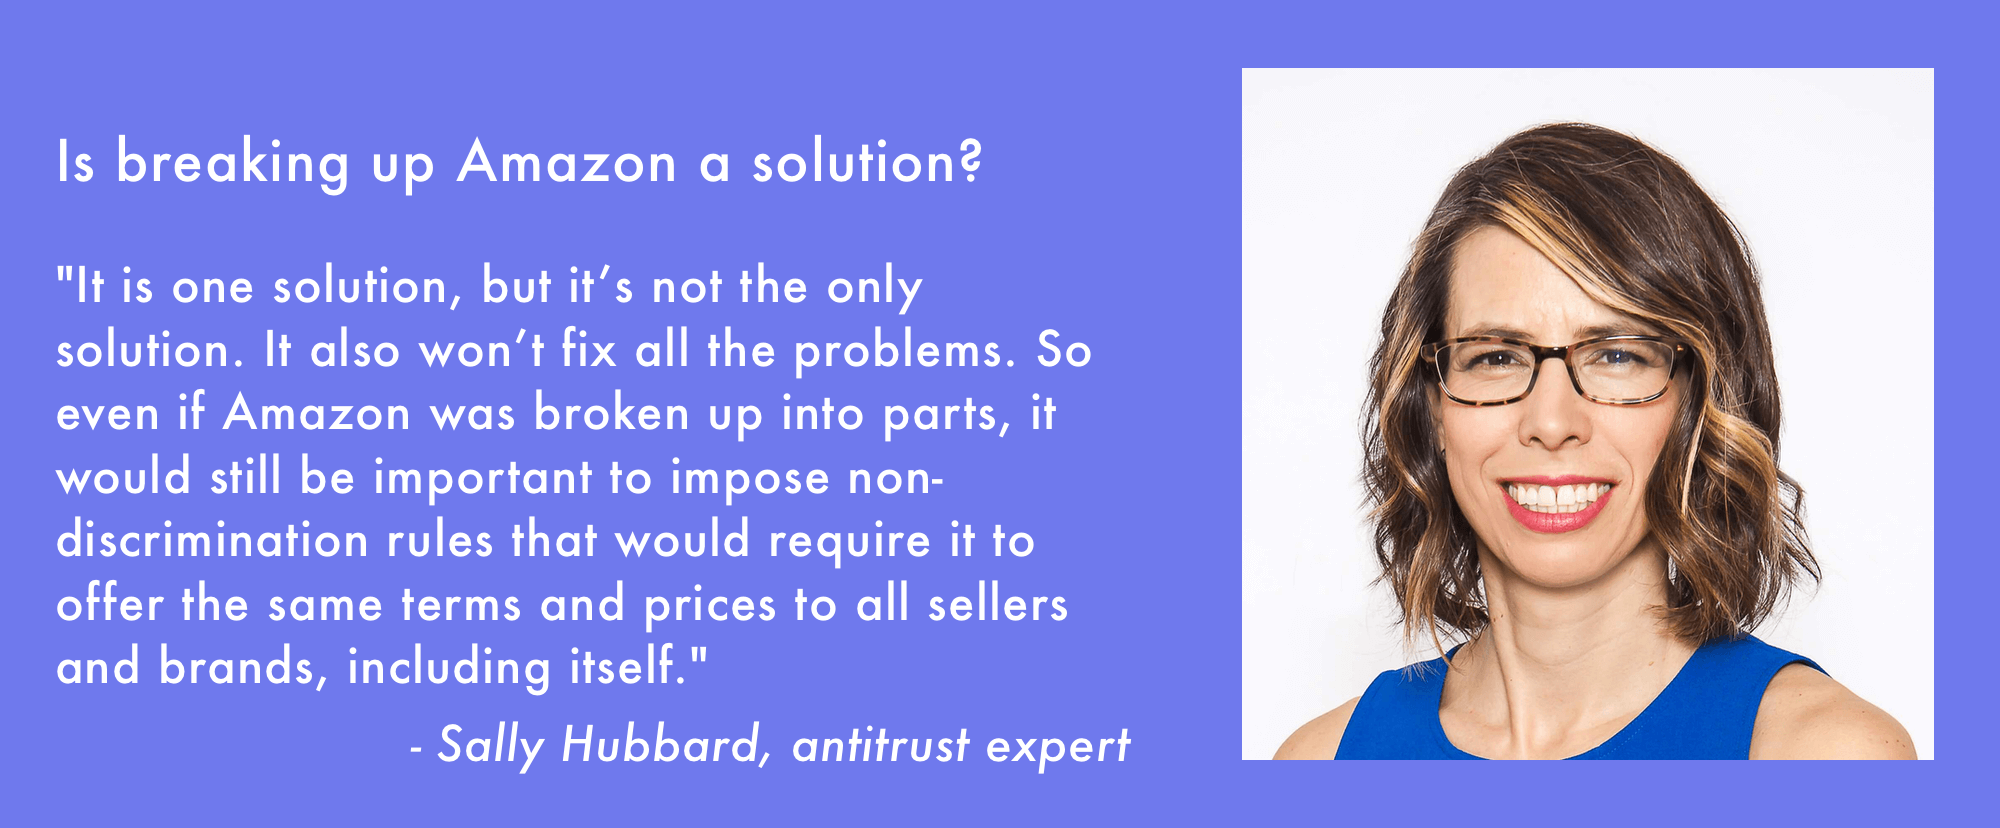 Sally Hubbard quote Is breaking up Amazon a solution?